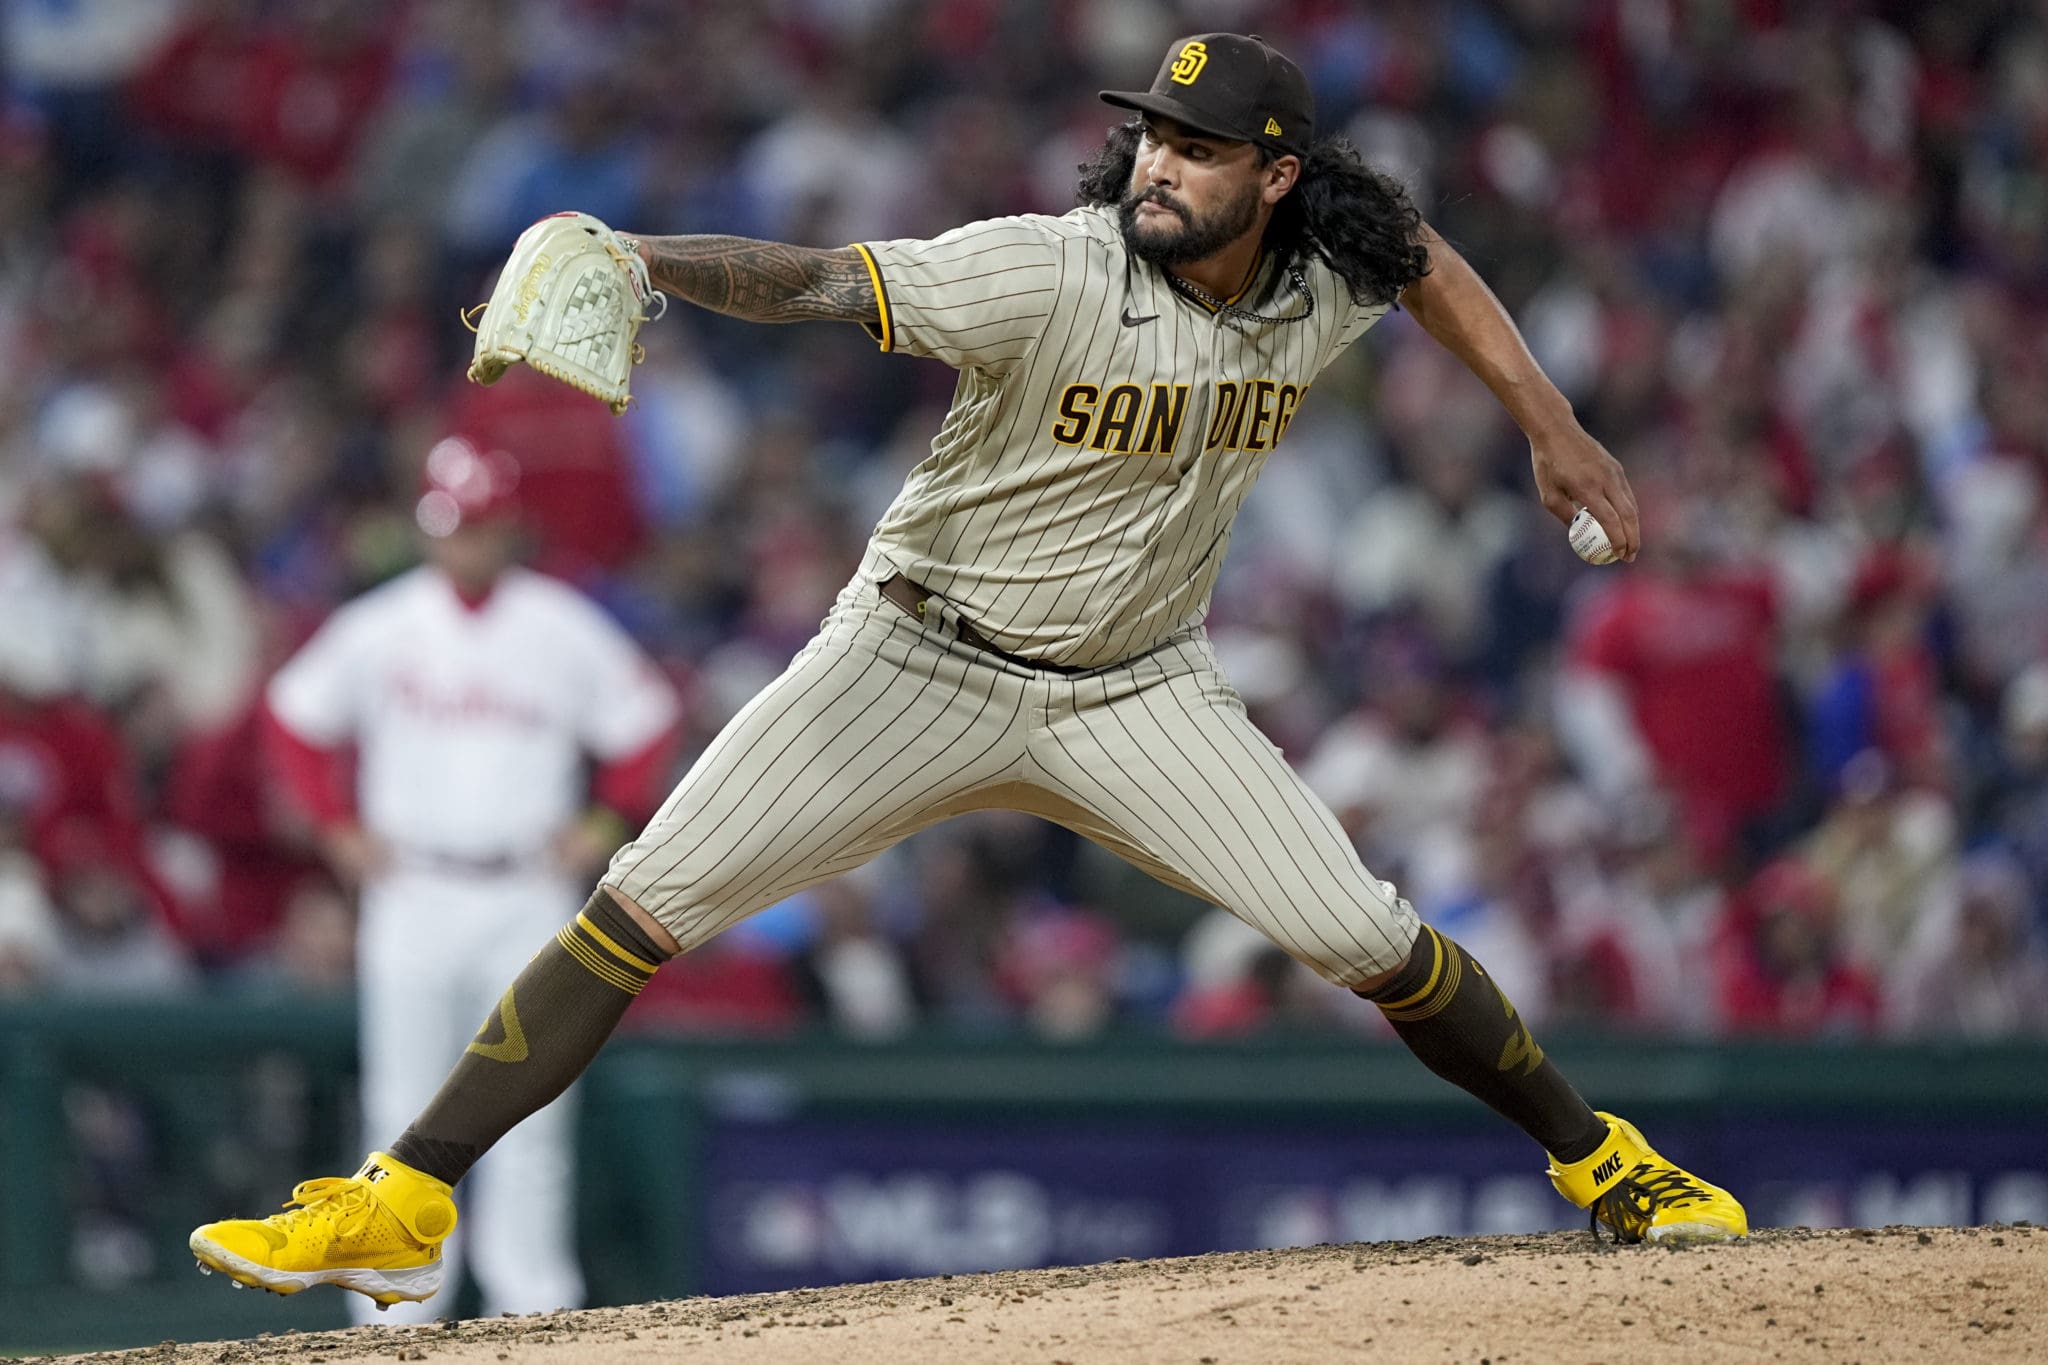 Athletics trade pitcher Sean Manaea to the Padres